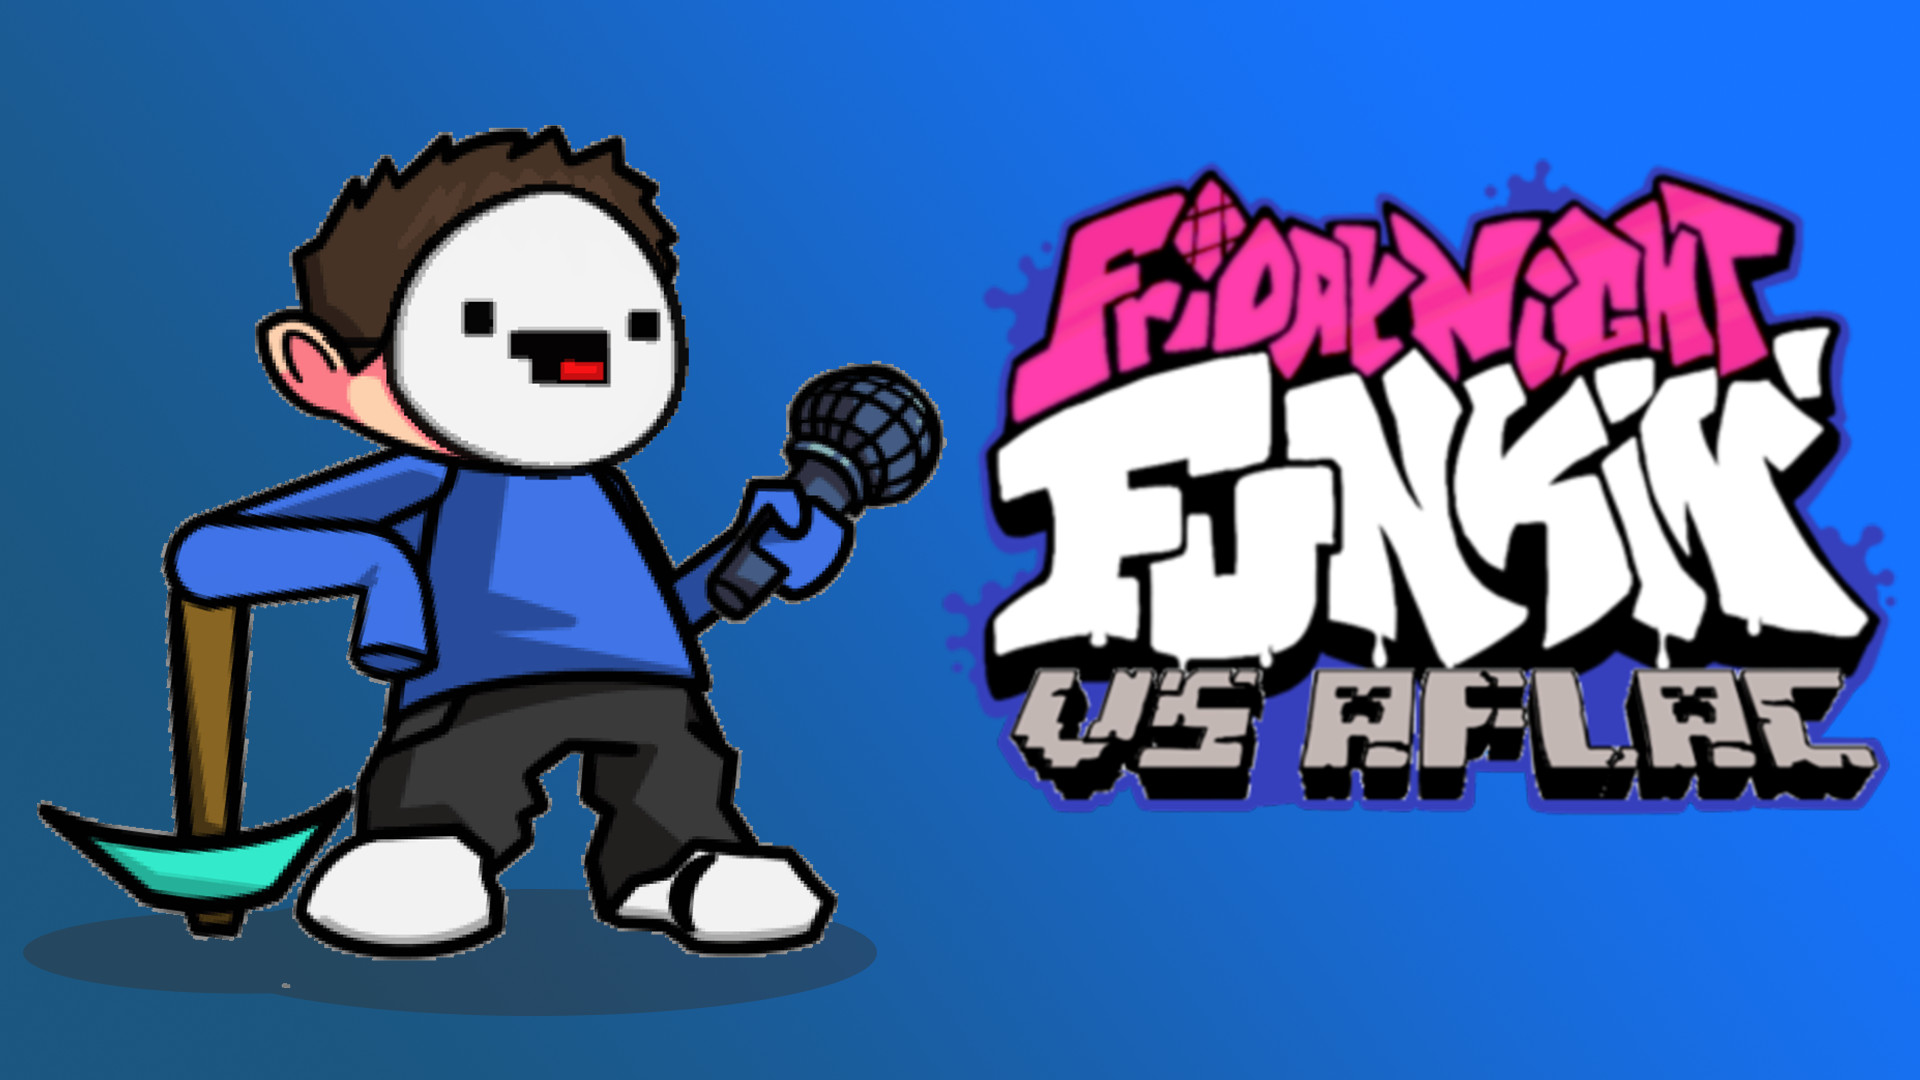 Fnf update. Aflac FNF Mod. Афлак ФНФ. FNF Aflac Remastered. Friday Night Funkin' vs Aflac Remastered.